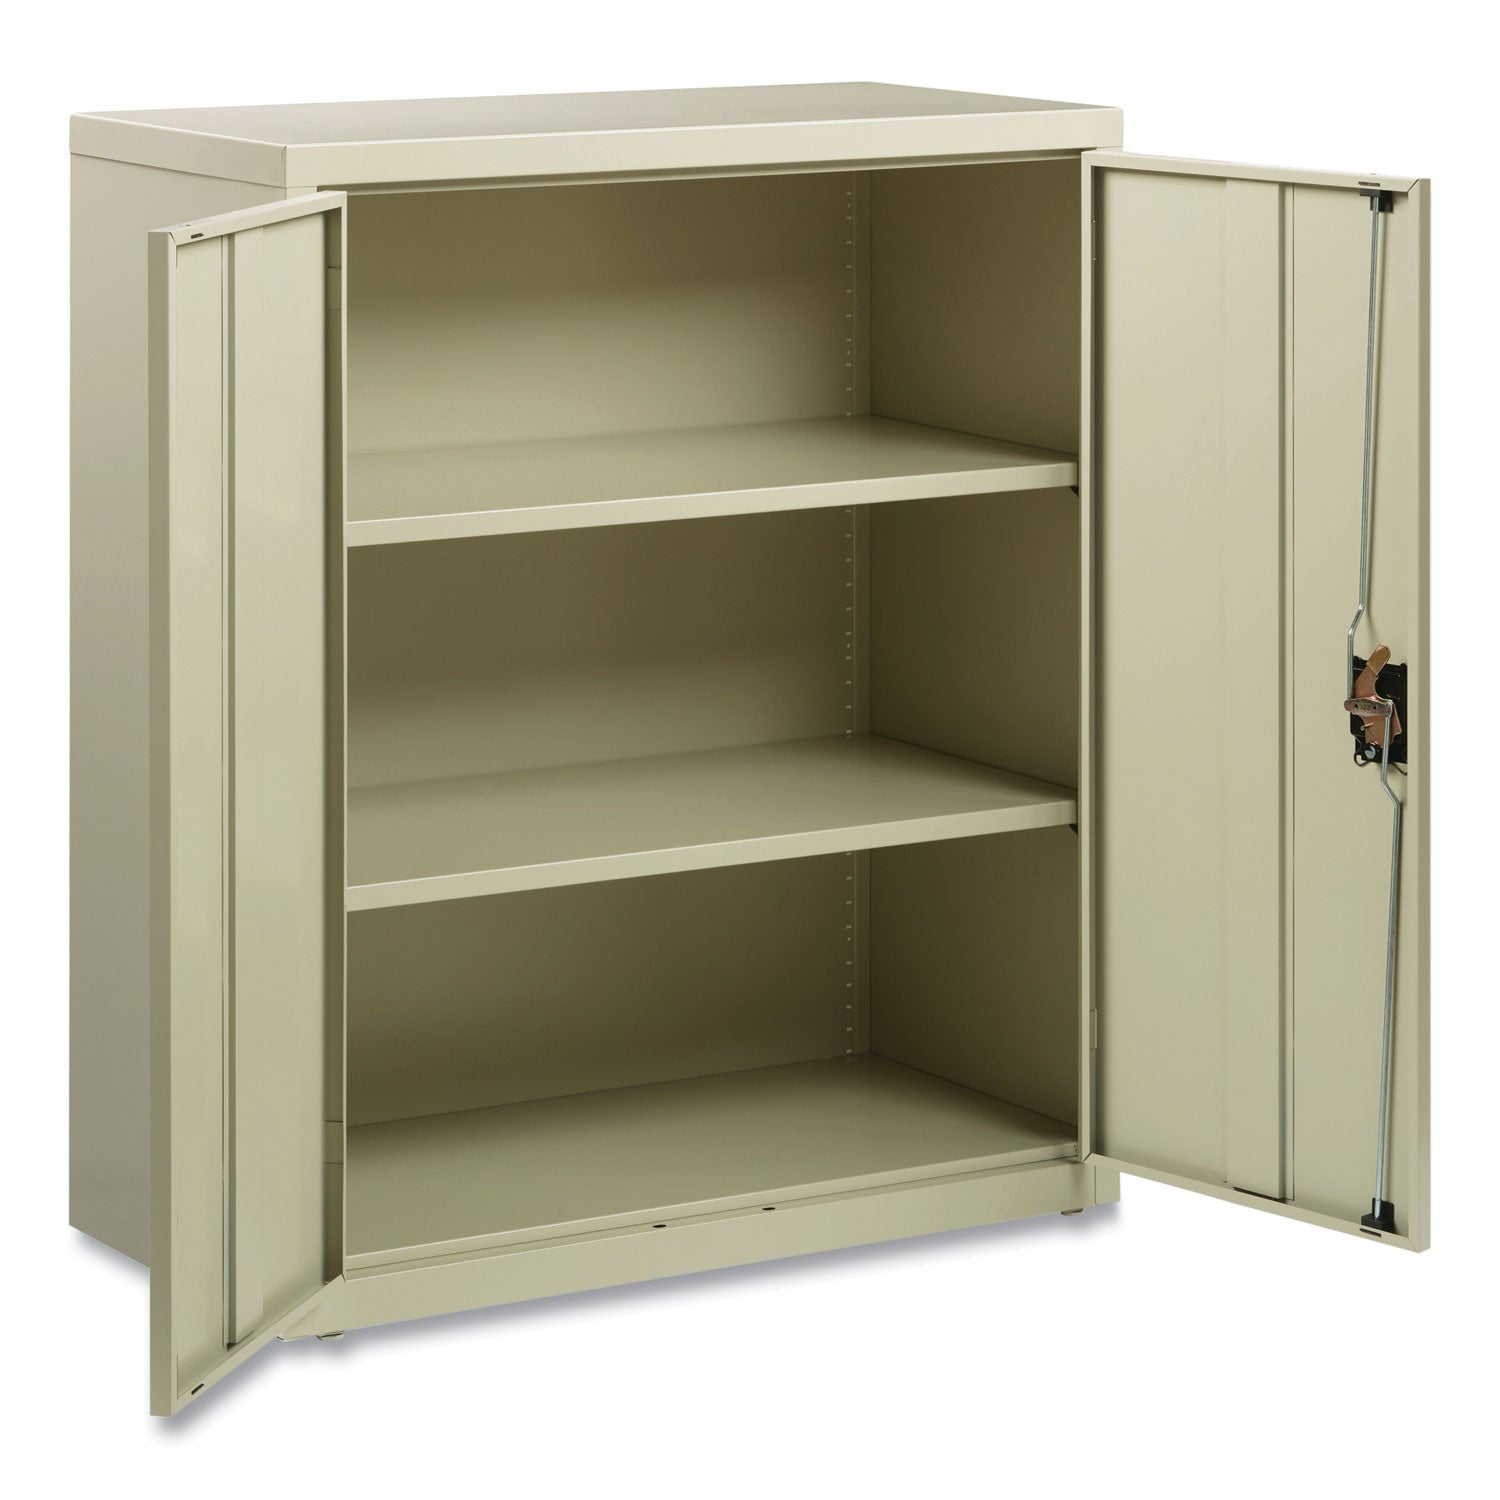 fully-assembled-storage-cabinets-3-shelves-36-x-18-x-42-putty_oifcm4218py - 2